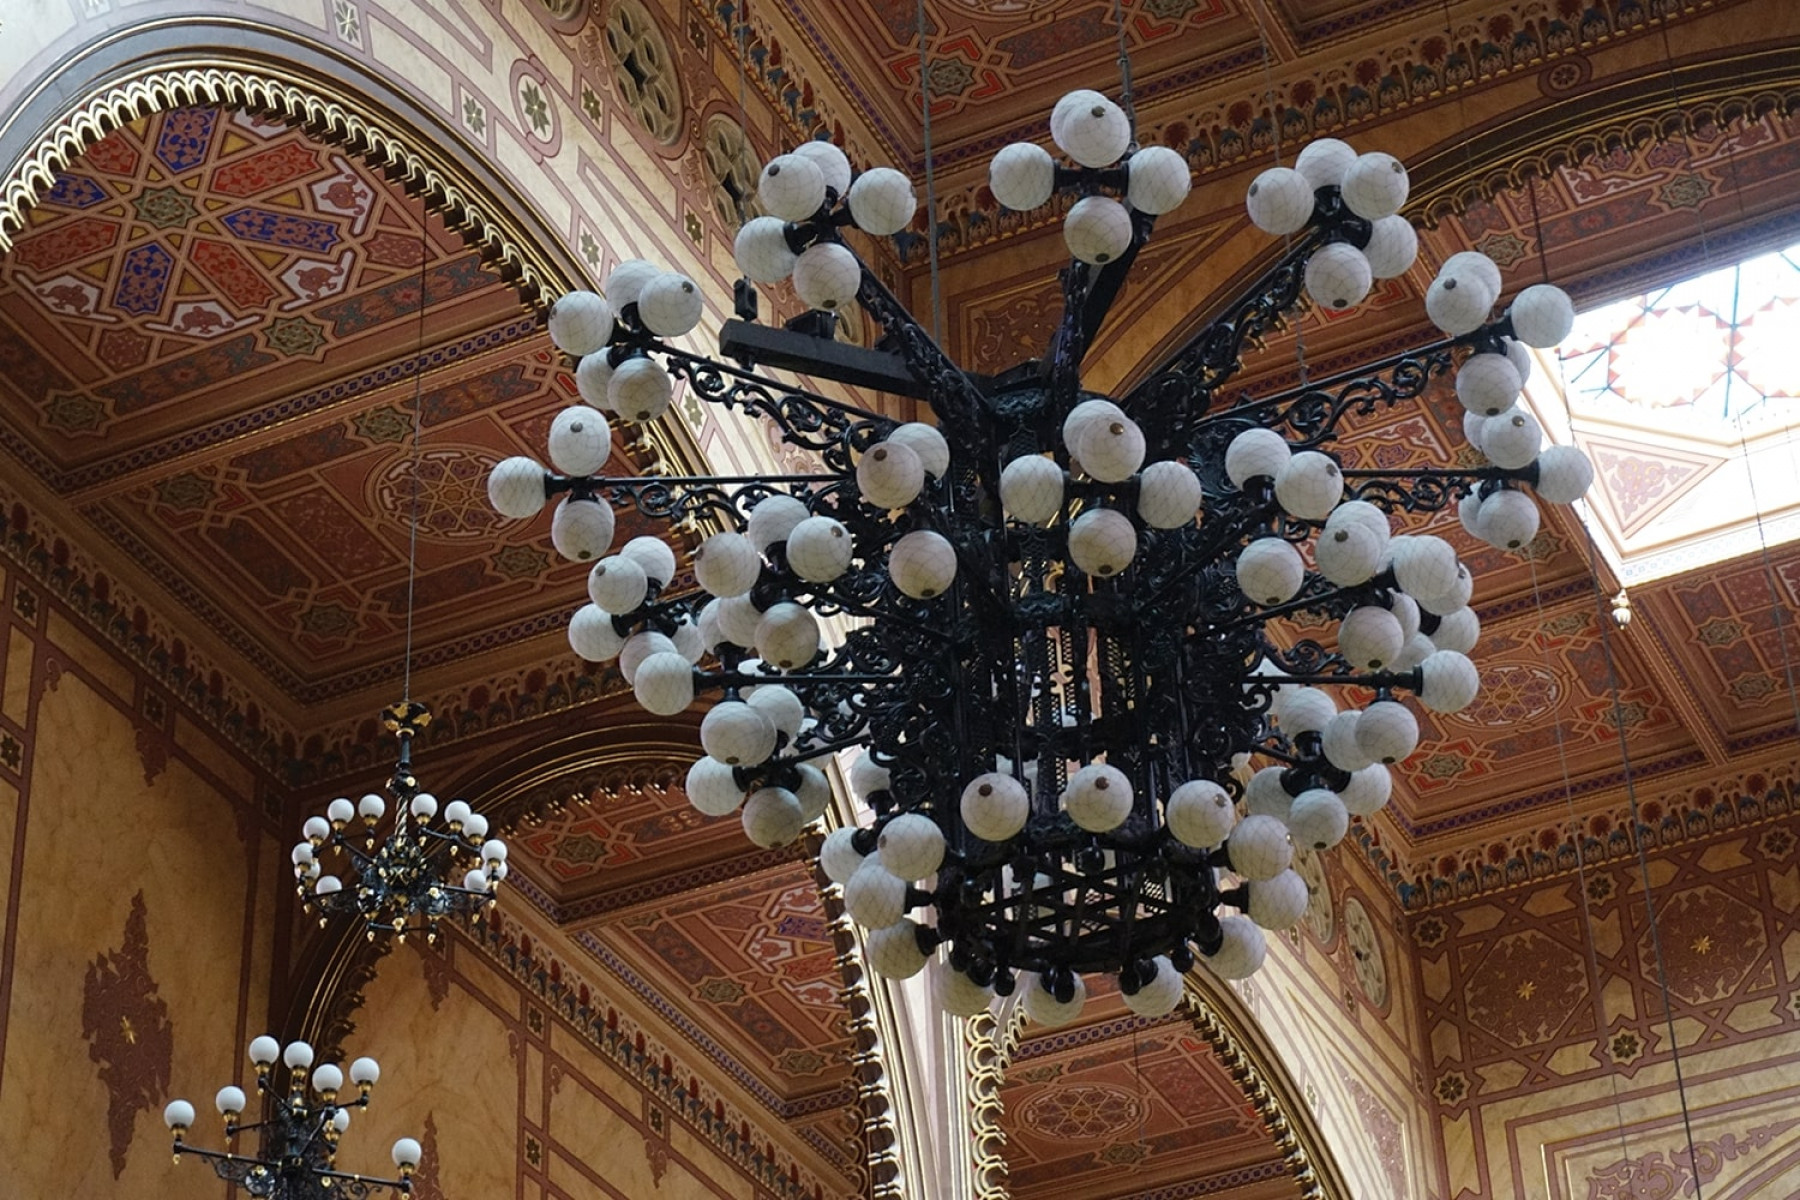 The beautiful chandeliers of the synagogue